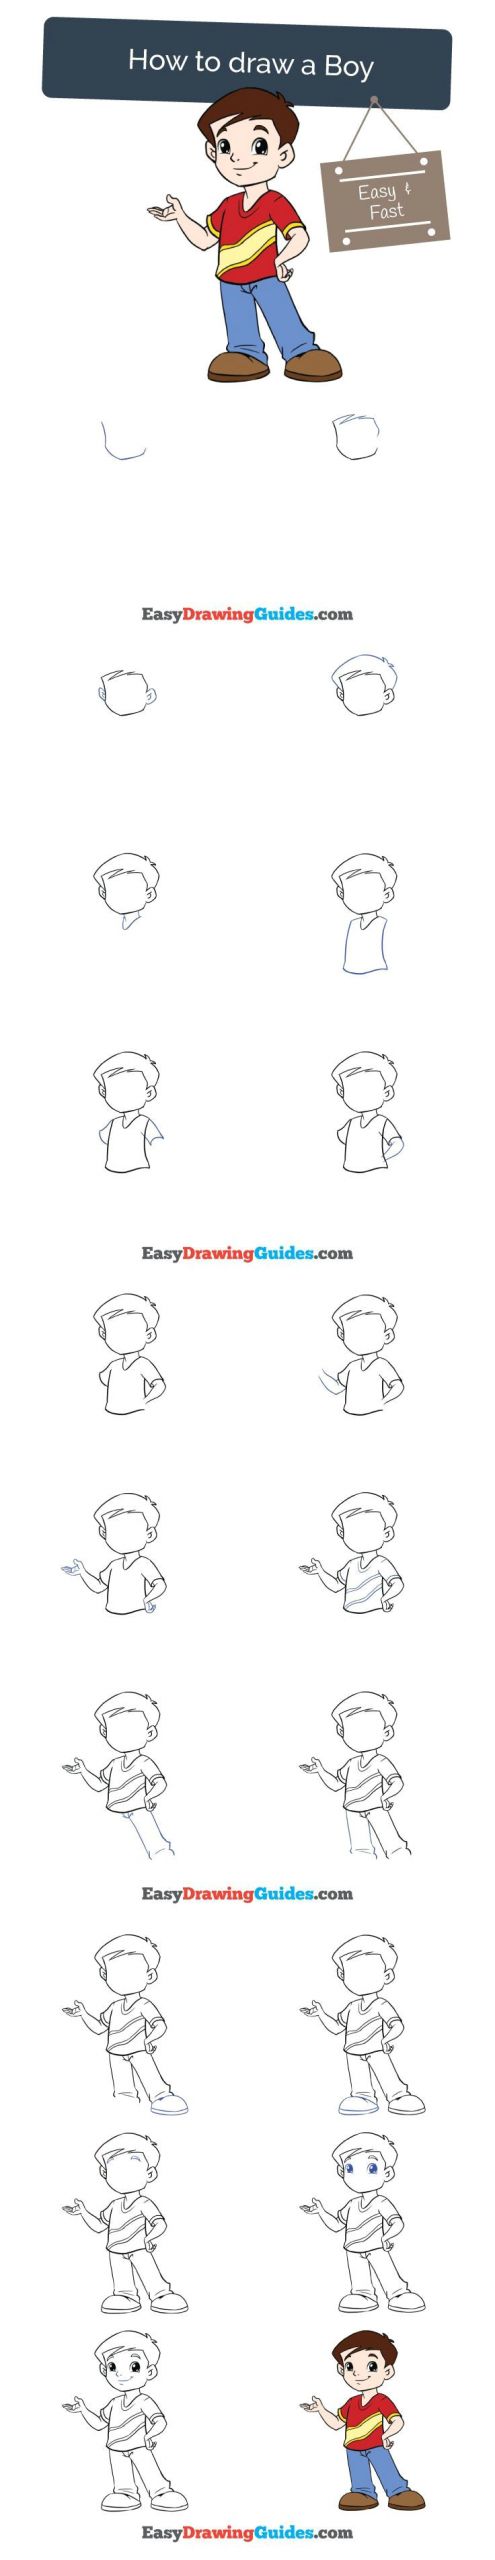 Anime Drawing Step by Step Boy How to Draw A Boy Drawing Tutorials for Kids Easy